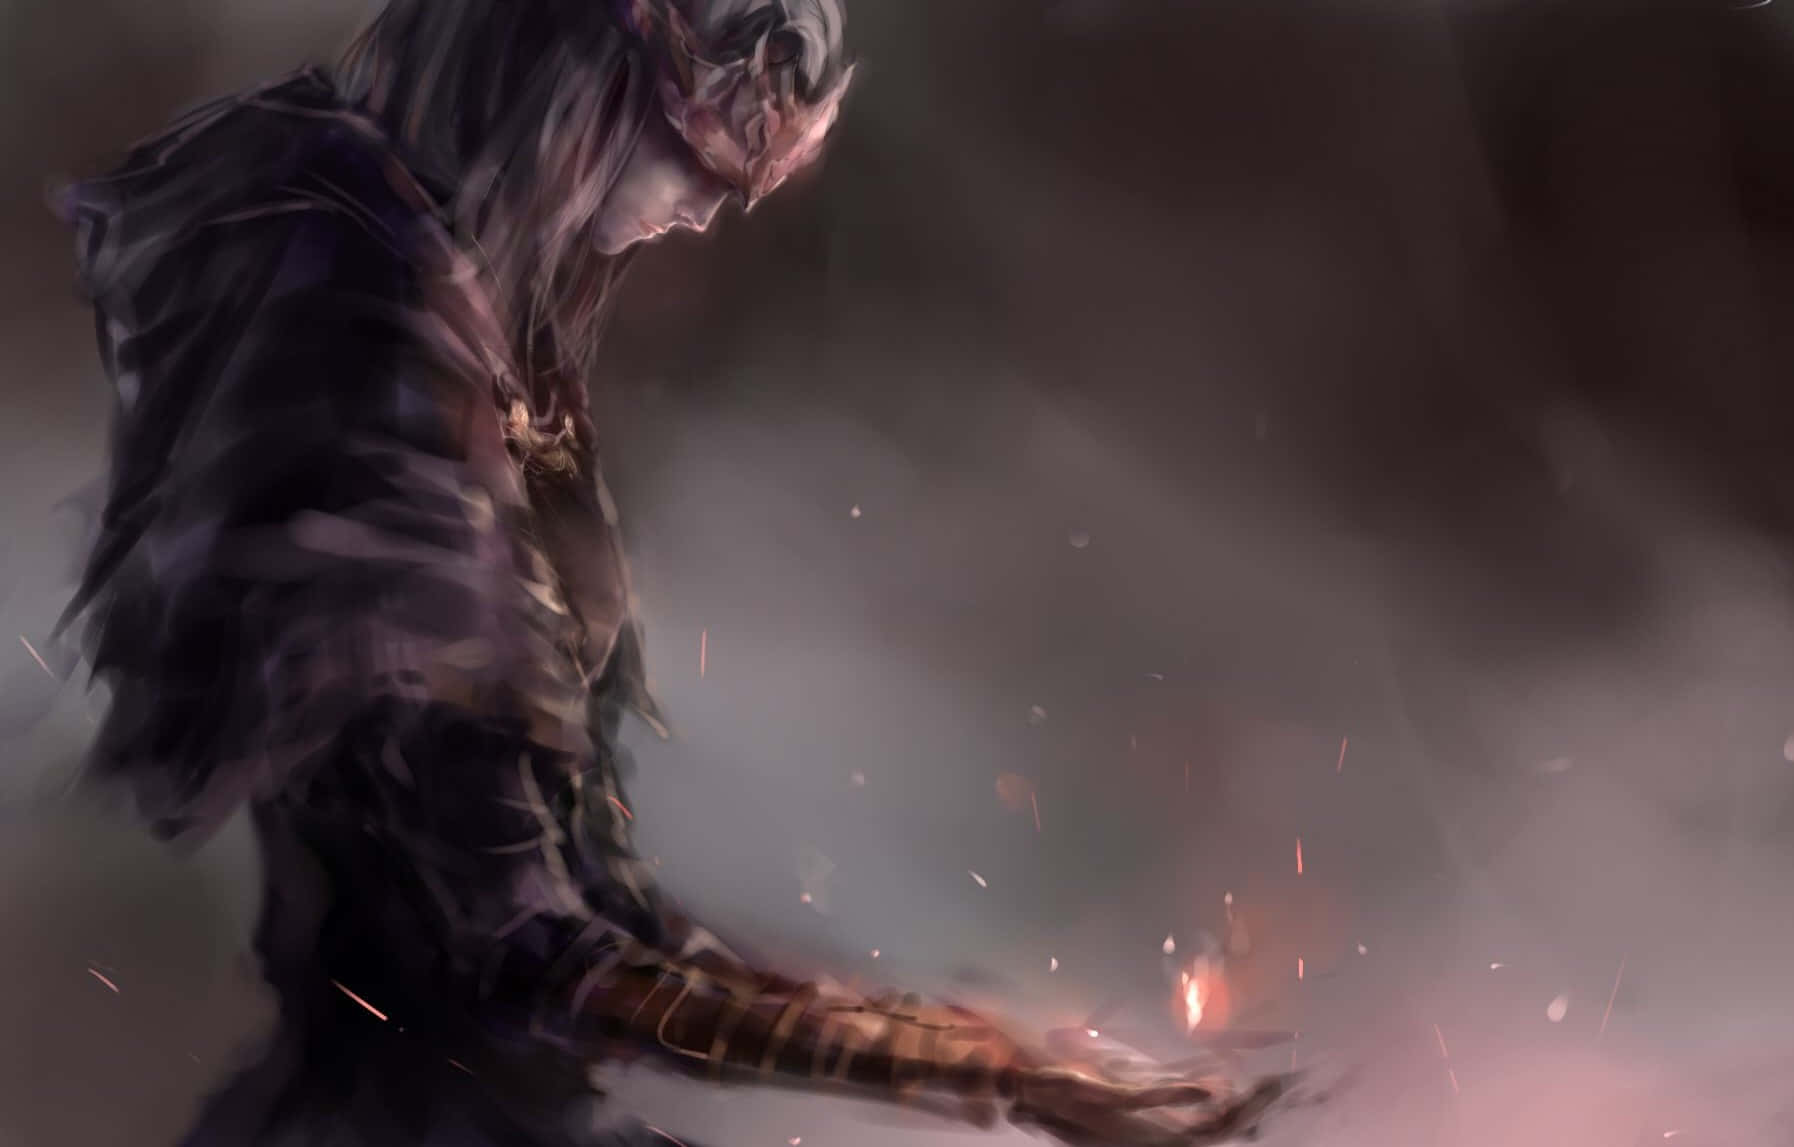 Fire Keeper in front of Soul-consuming Flames Wallpaper